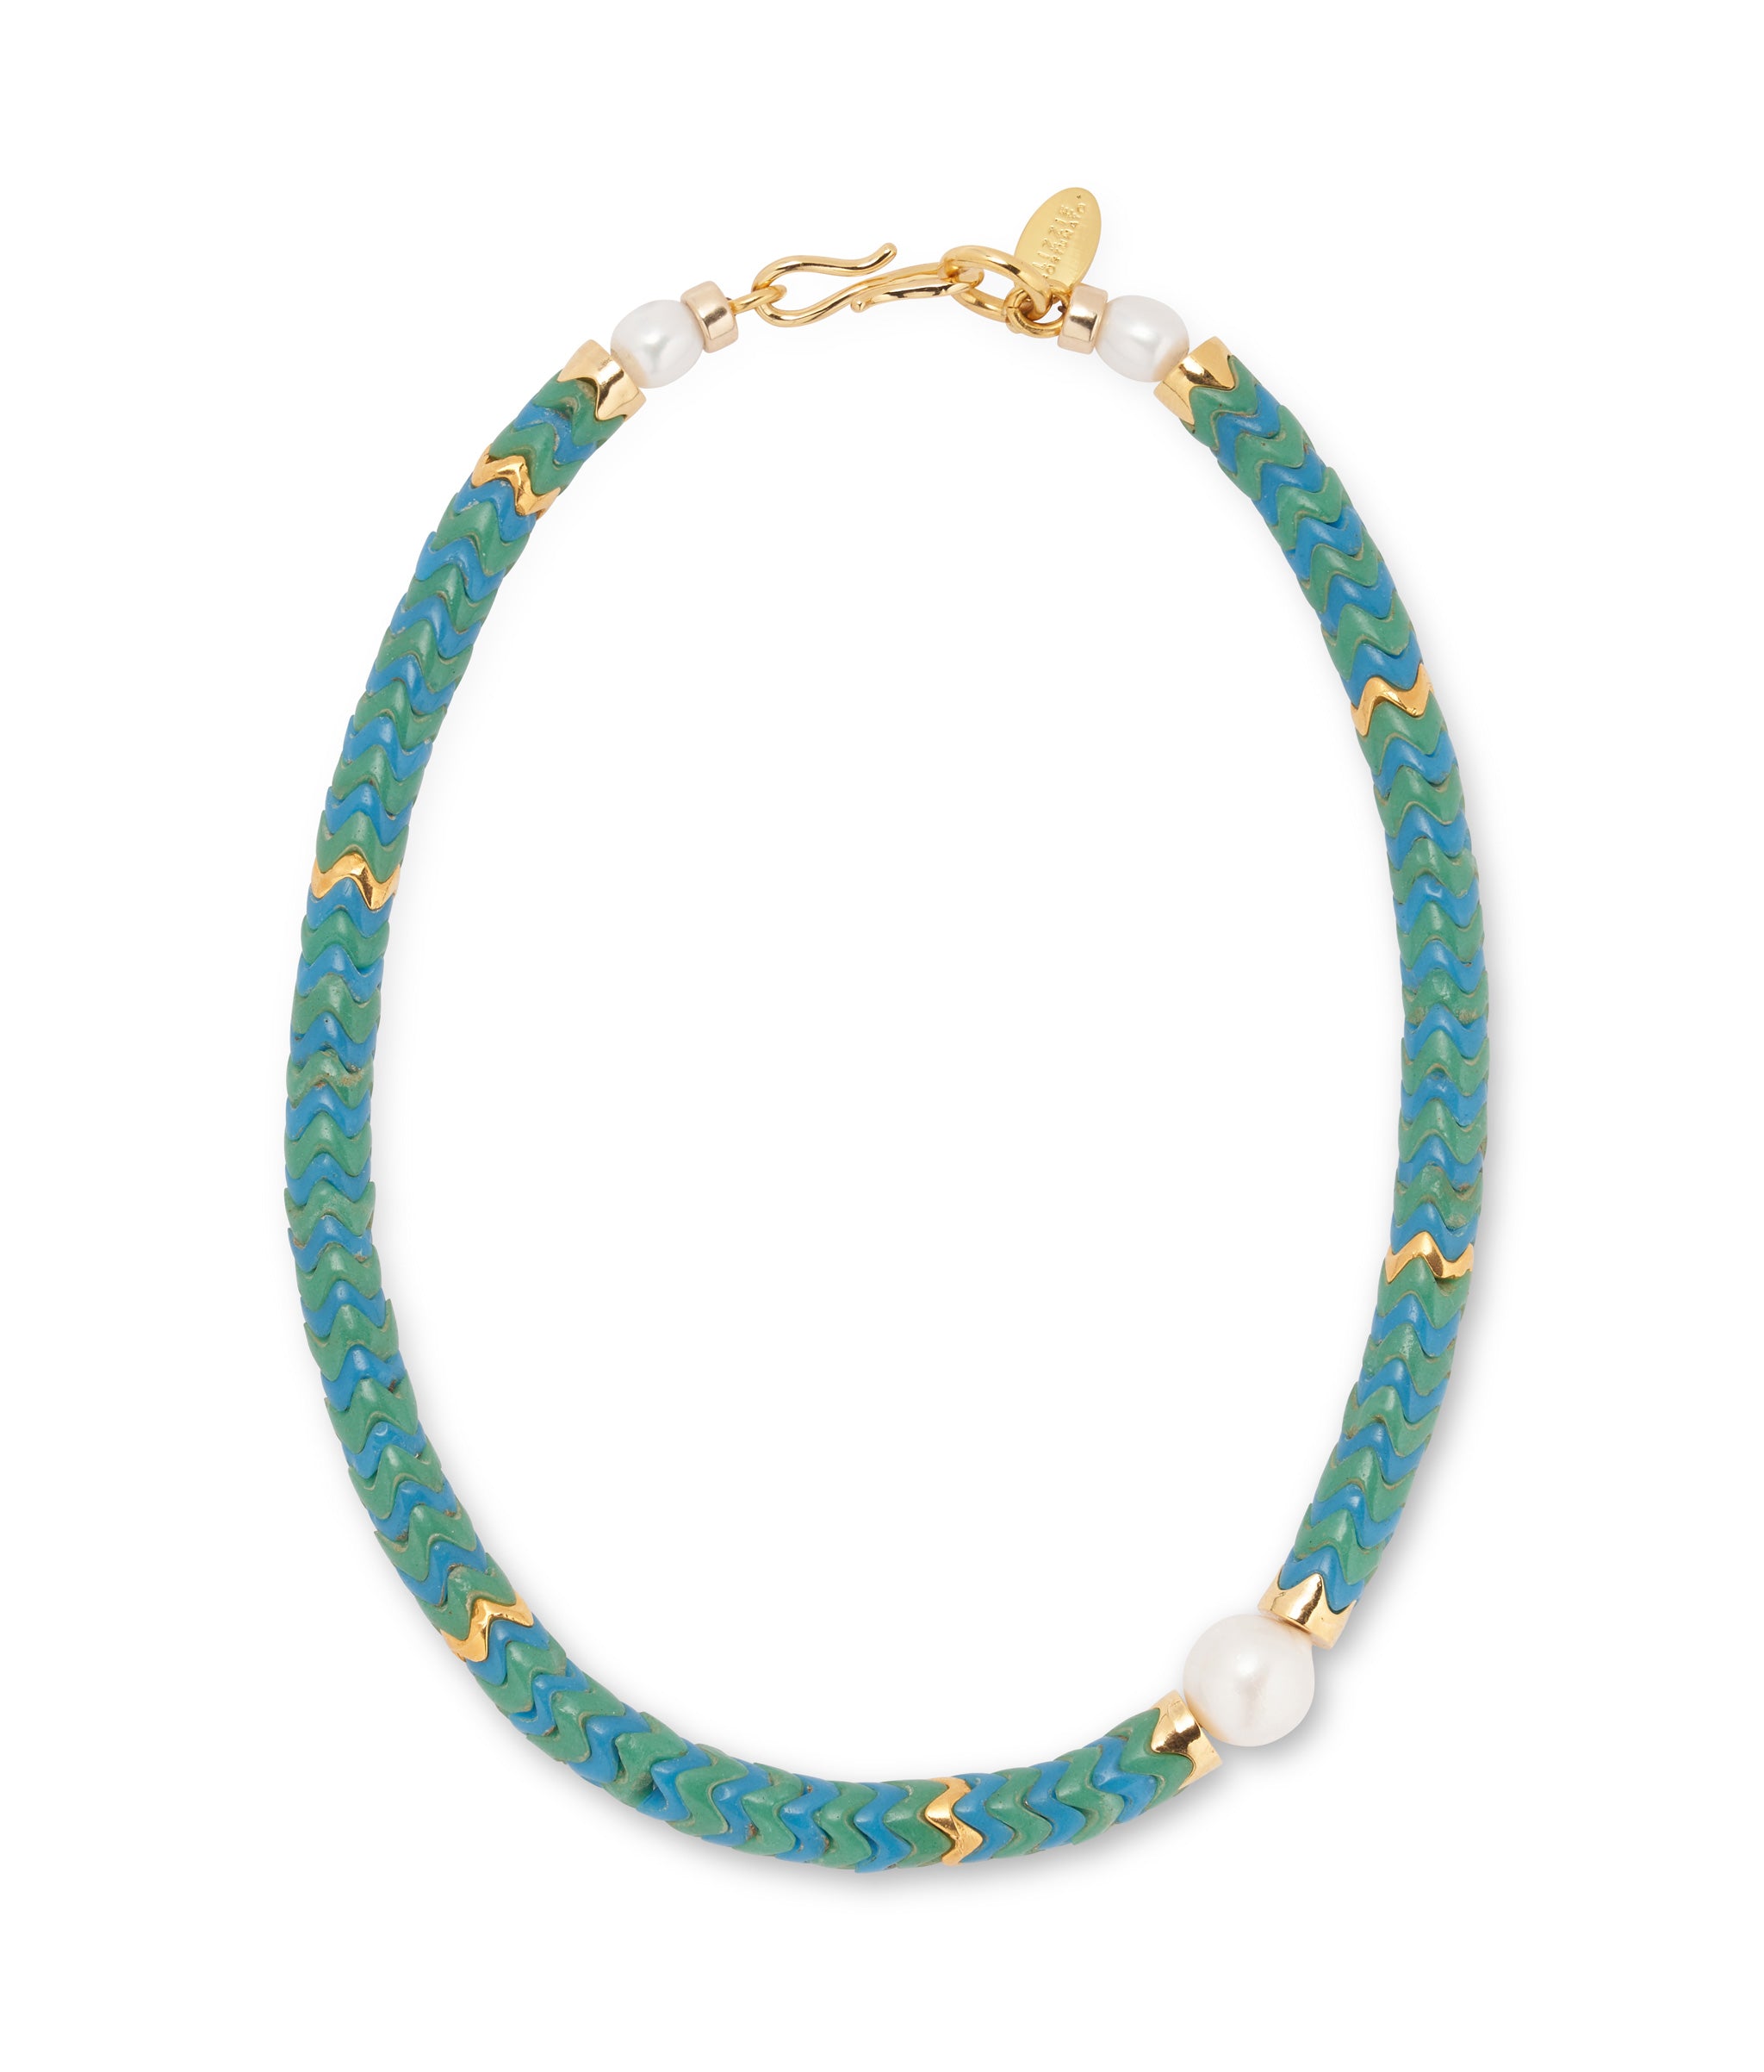 Painted Coast Necklace in Ocean. Single strand of interlocking wavy glass beads in green and aqua with pearl accents.